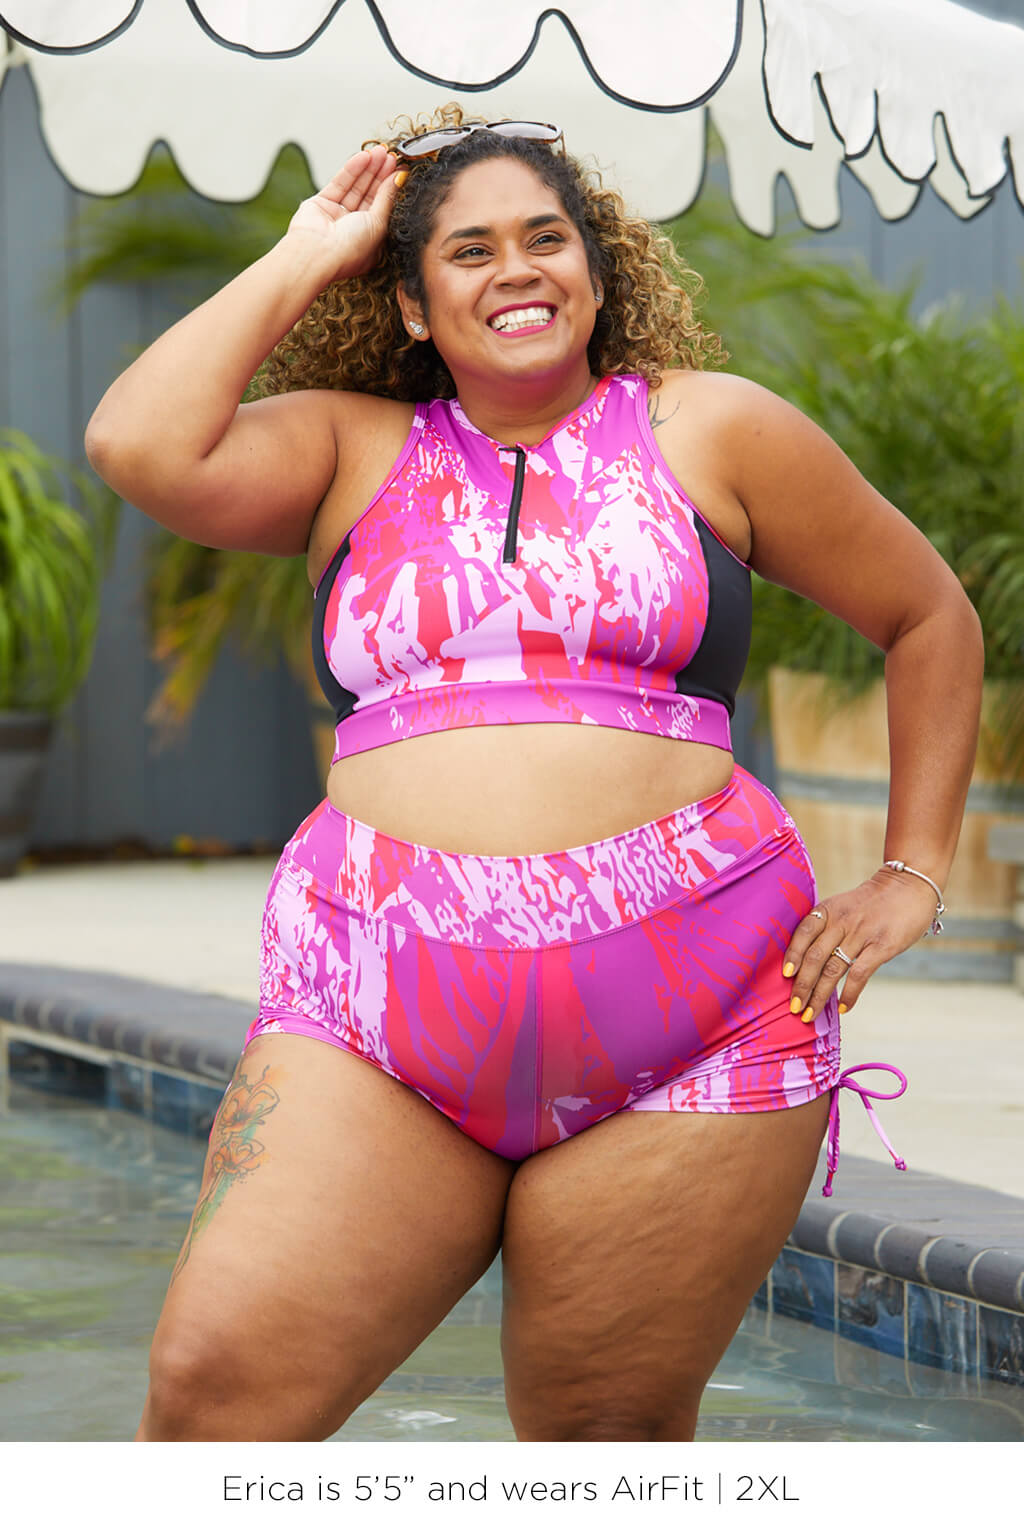 Plus Size Swimsuits, Cheap Swimming Costumes